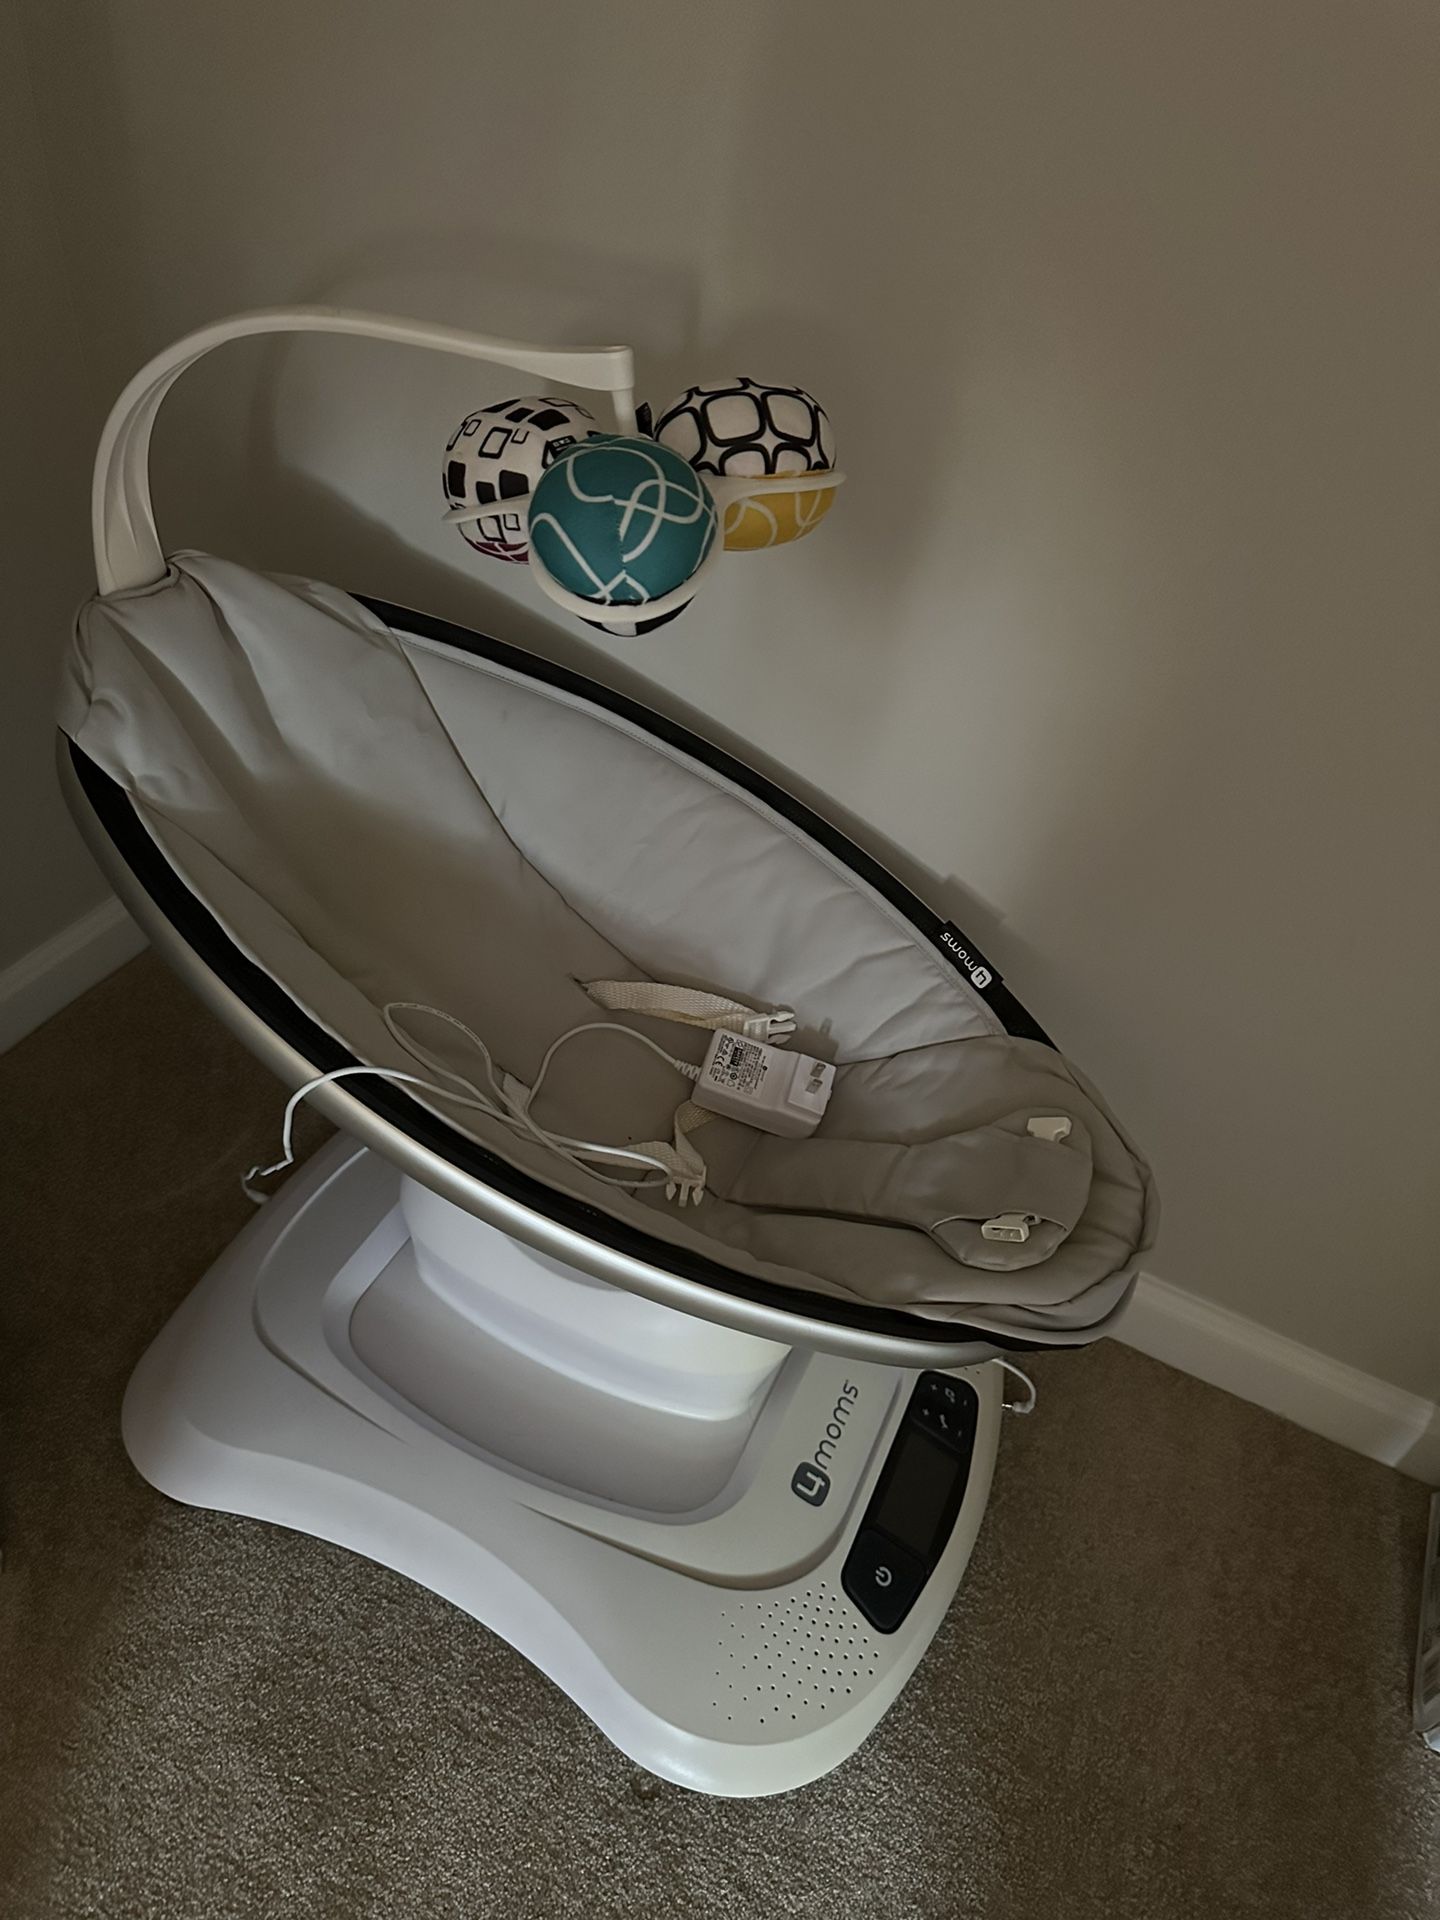 4moms MamaRoo Multi-Motion Baby Swing, Bluetooth Enabled with 5 Unique Motions